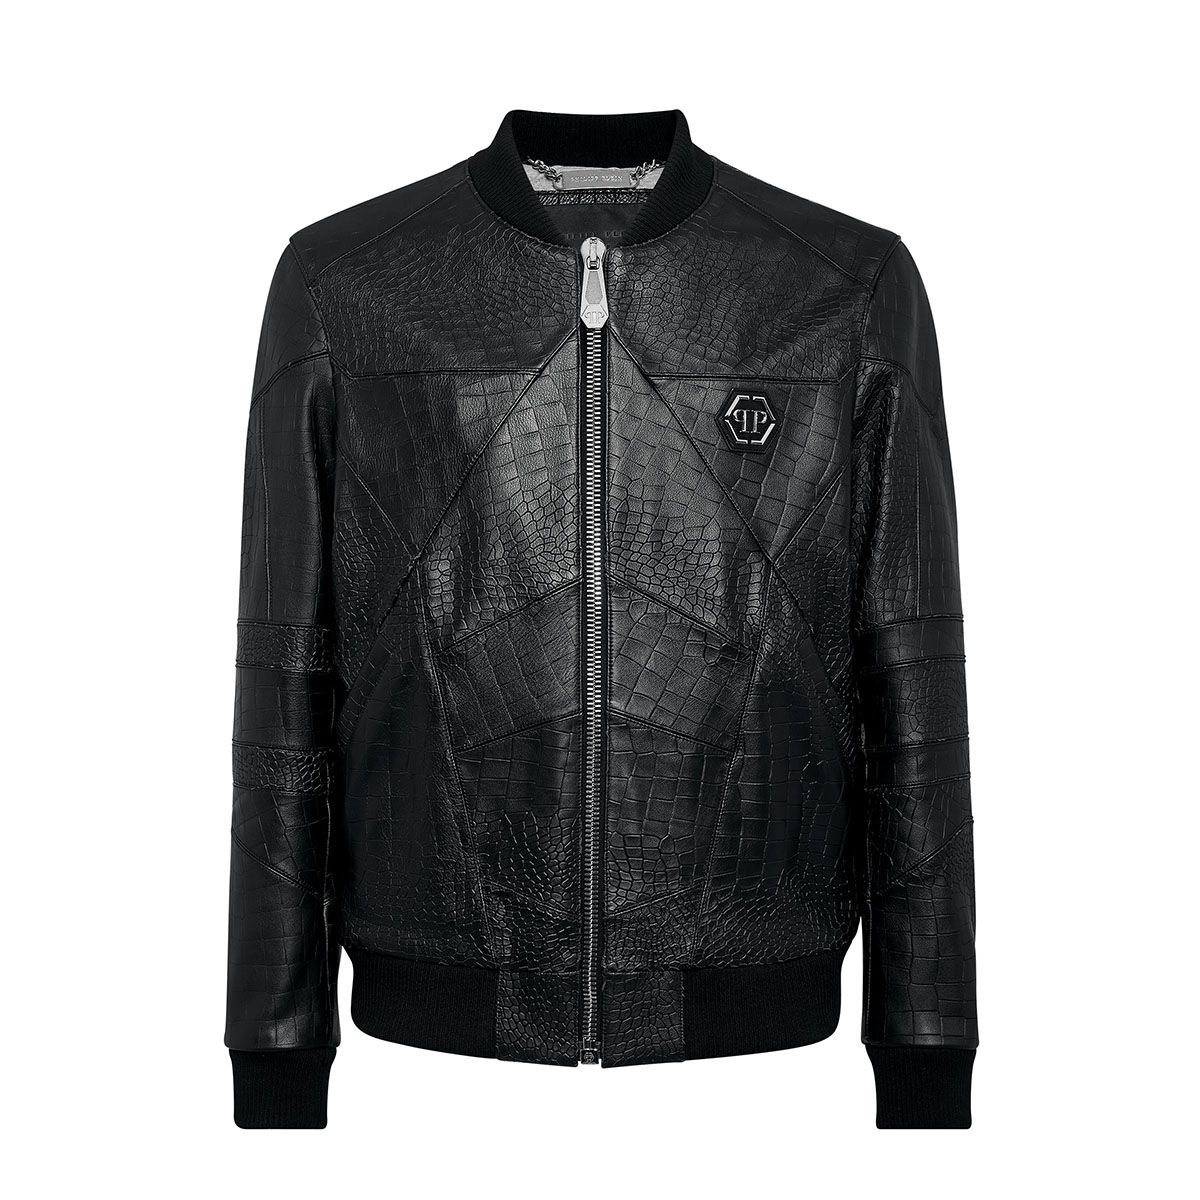 Cocco Print Leather Jacket